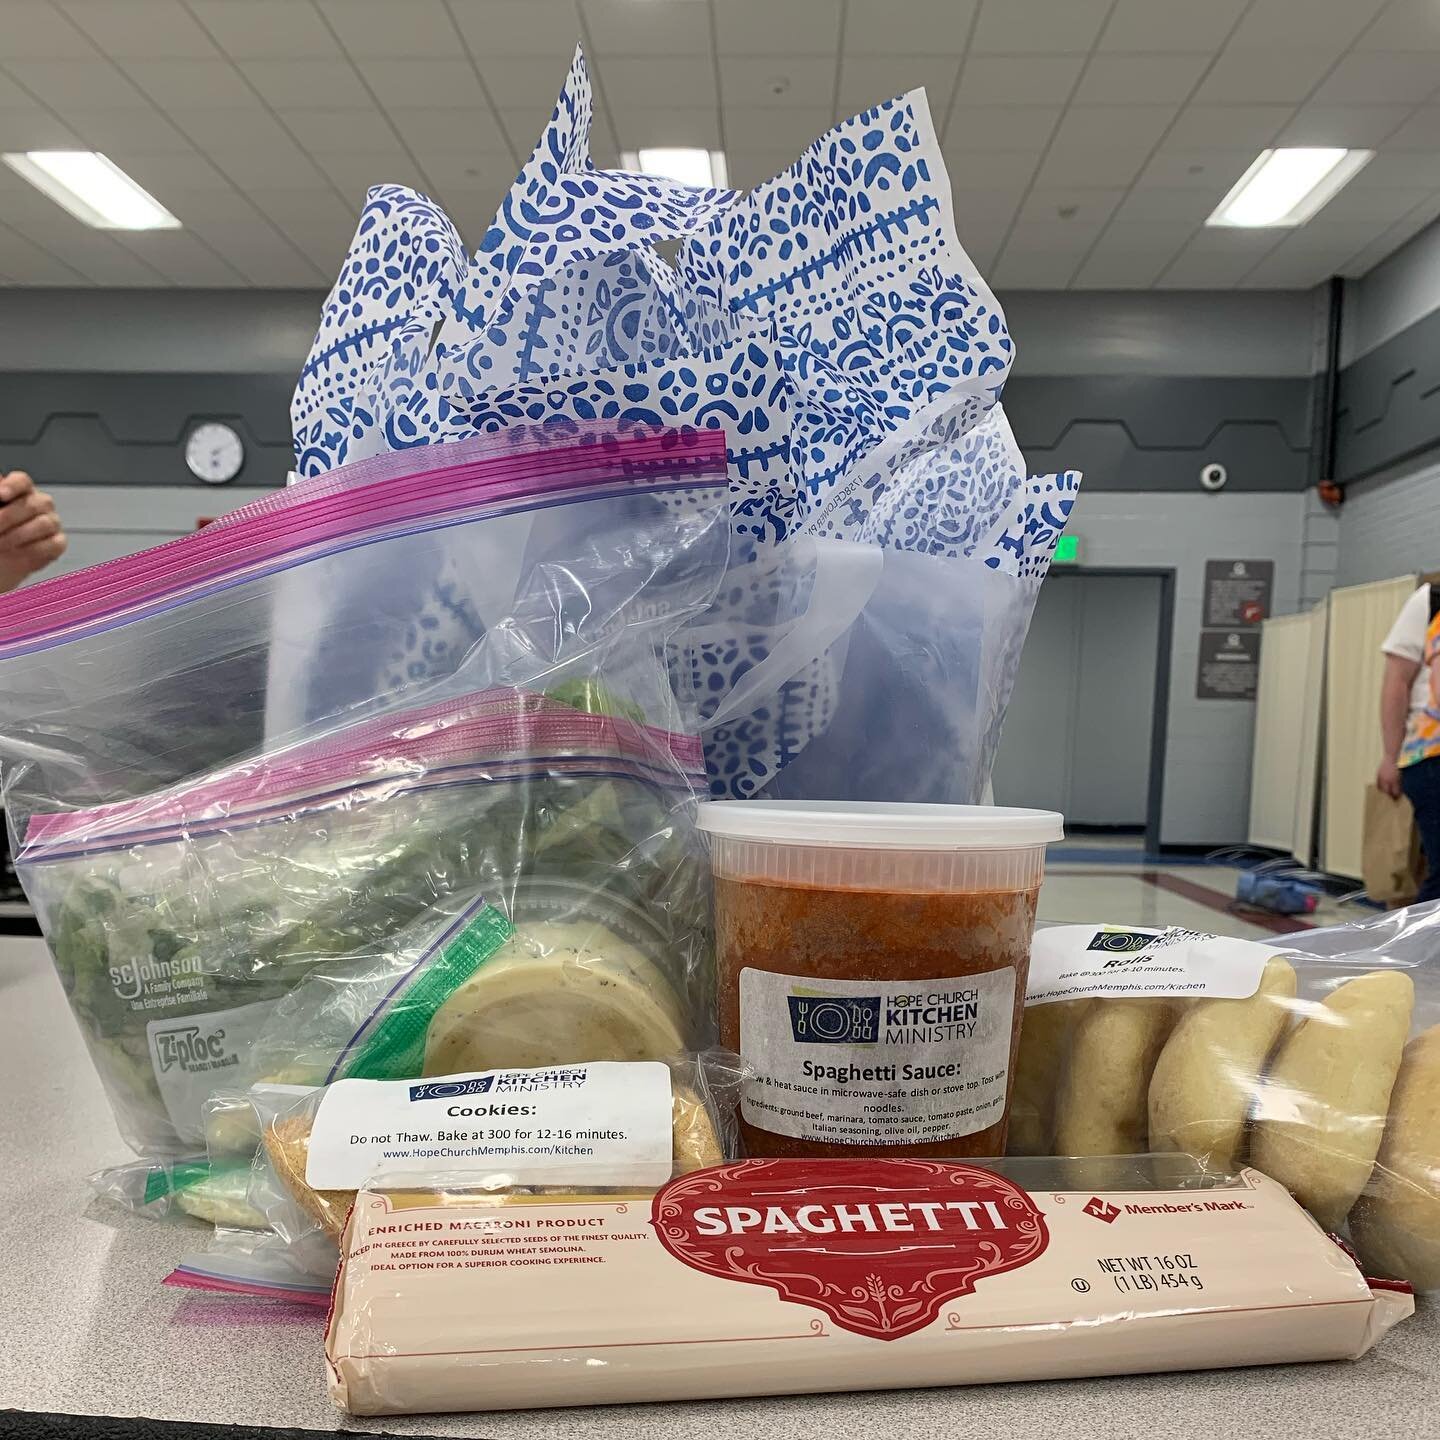 Thank you to everyone who donated toward our Take Them a Meal event! Wednesday every staff member went home with dinner that included spaghetti, sauce, salad, rolls and cookies. This is one of our favorite Teacher Appreciation Week traditions!